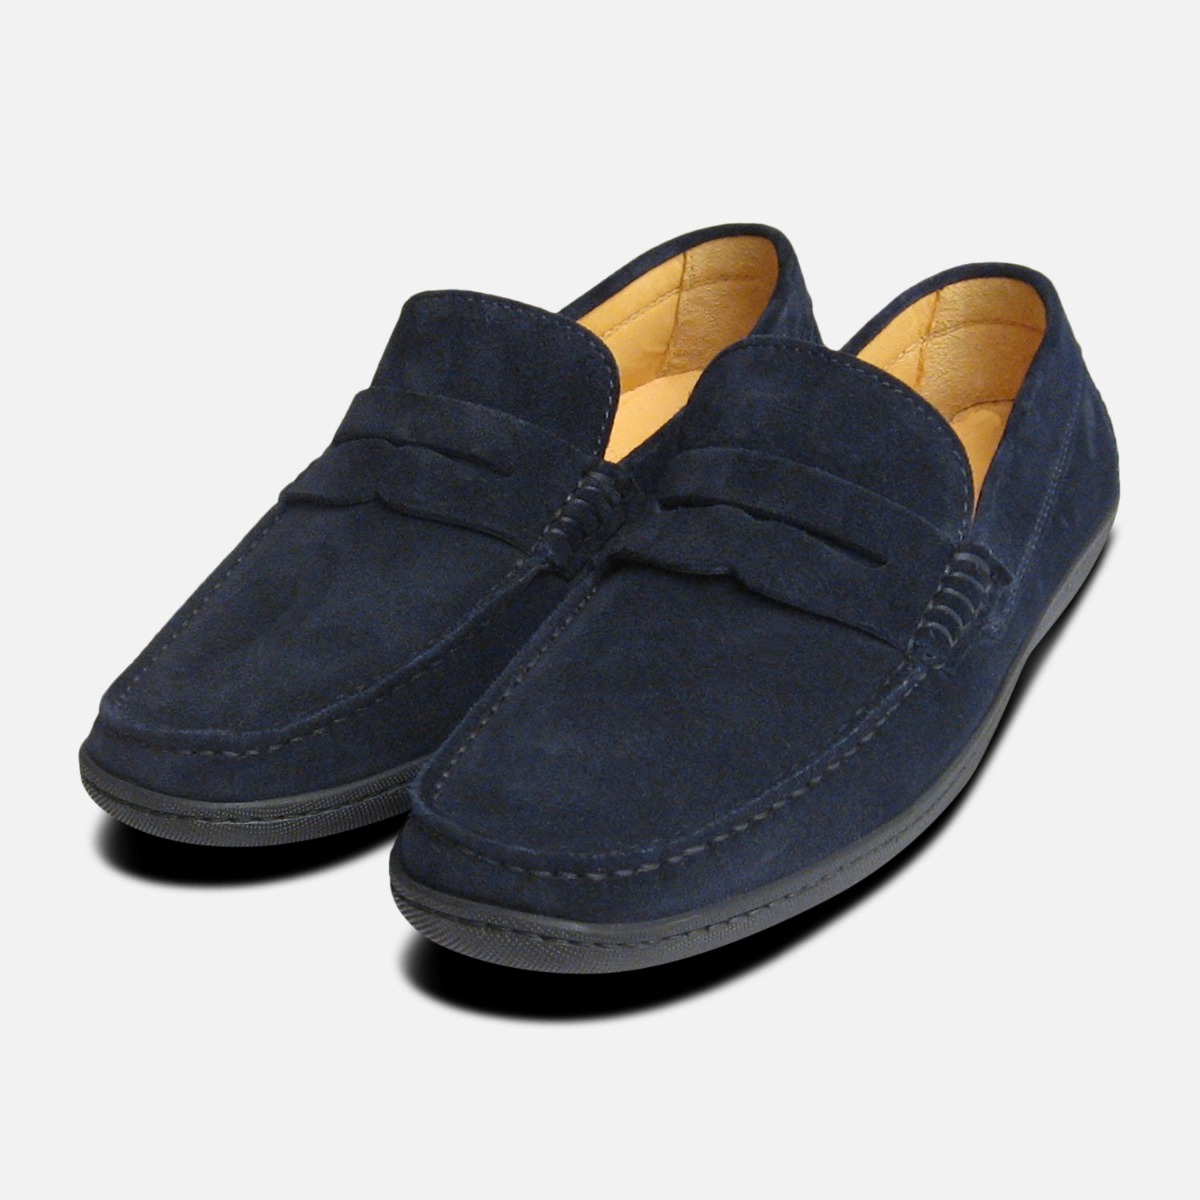 Mens Suede Leather Comfy Slip On Casual Penny Moccasin Driving Loafers Navy Blue